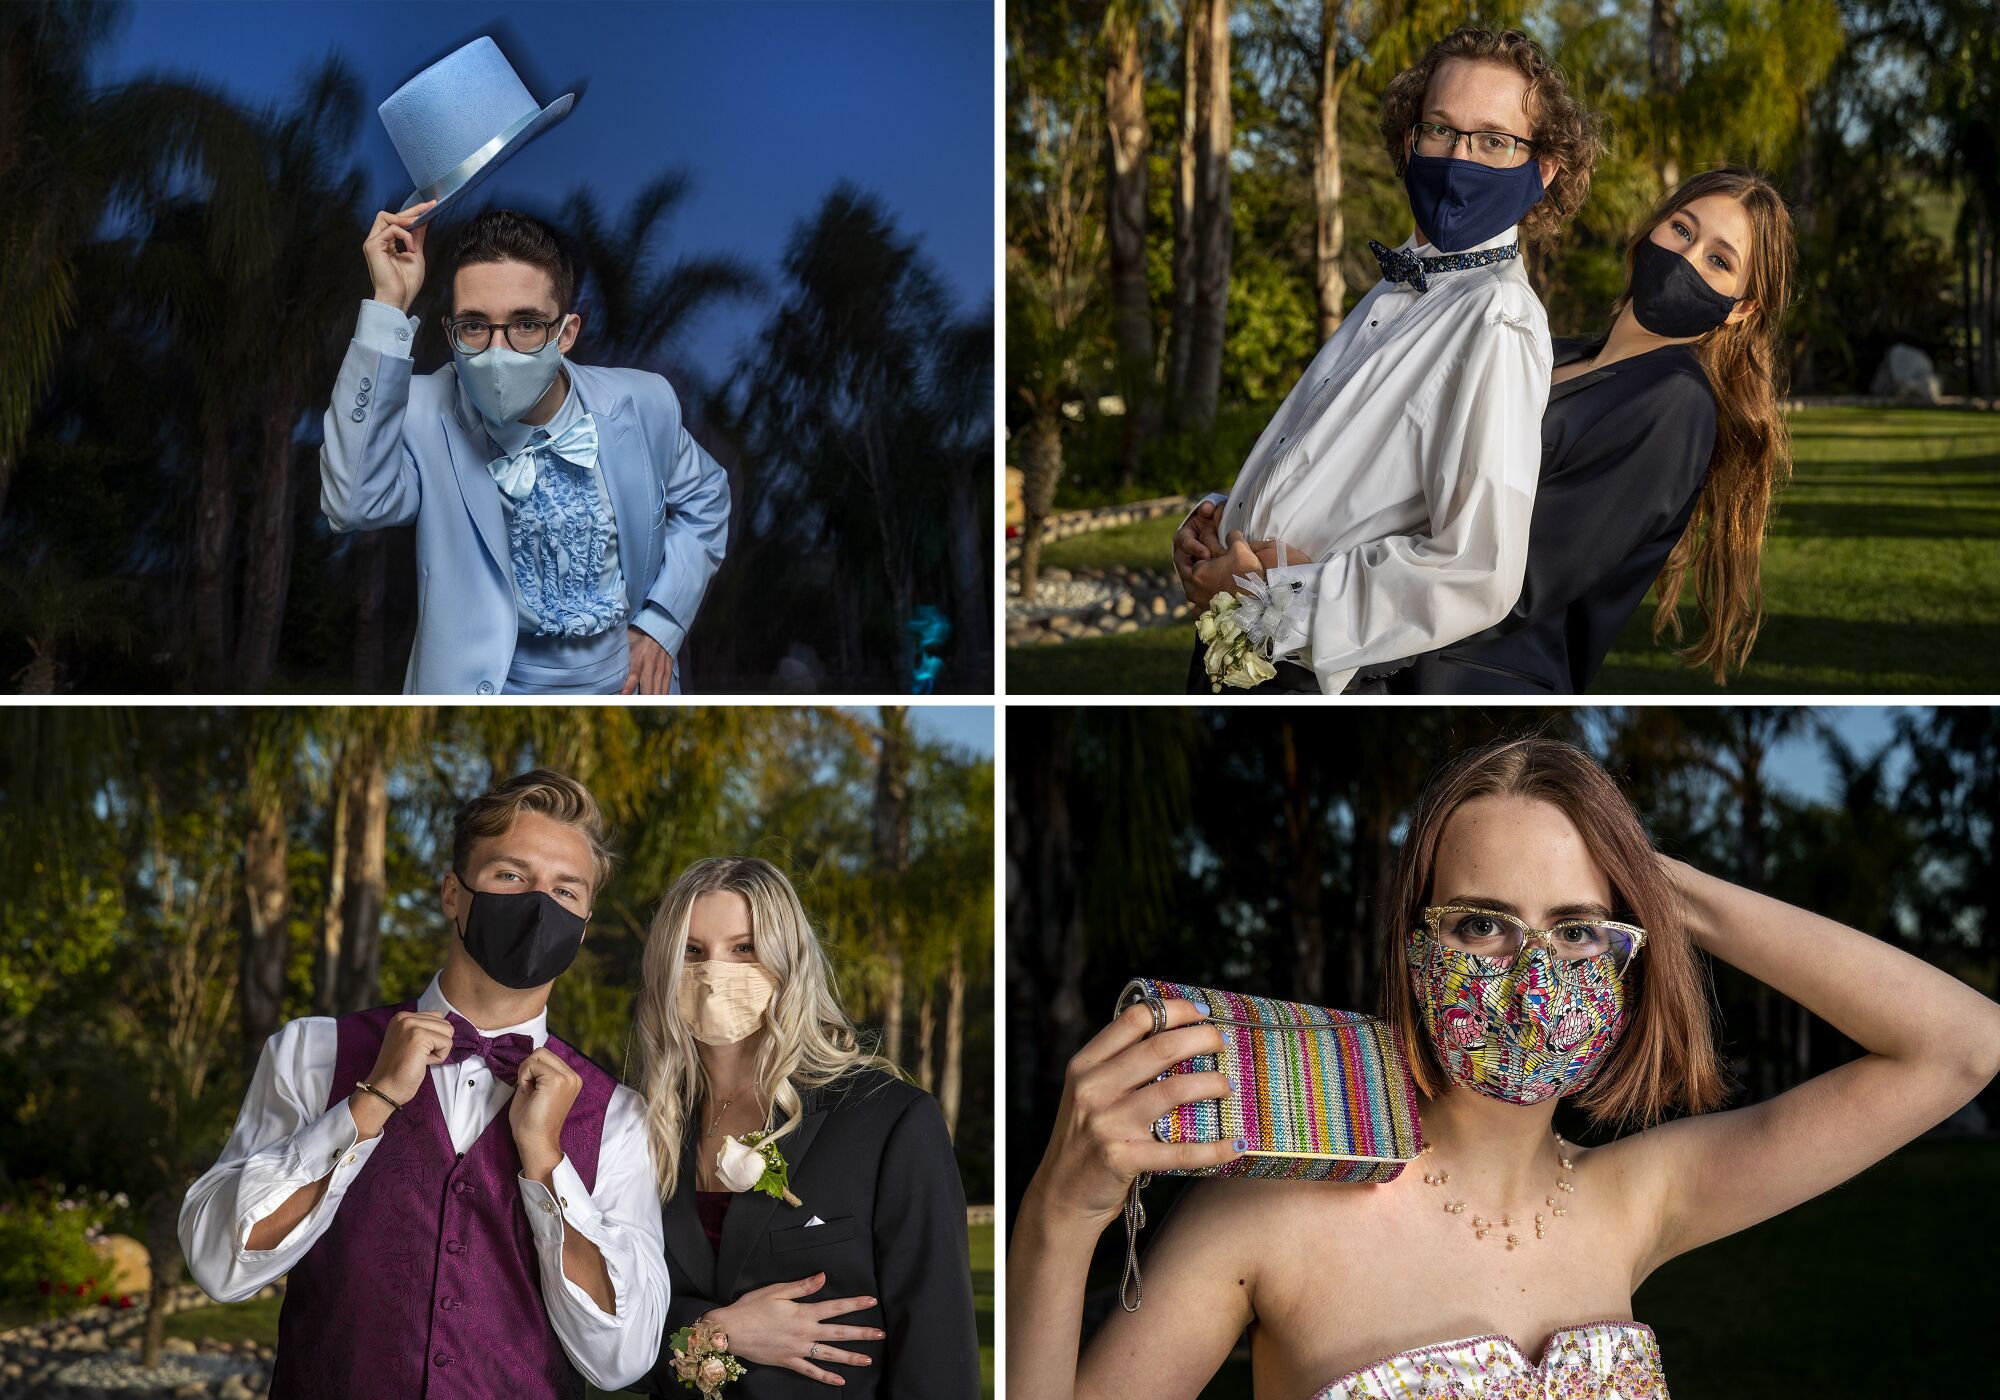 Four photos of students at prom tipping a hat, hugging a date, showing a purse to match a mask, and adjusting a bow tie.